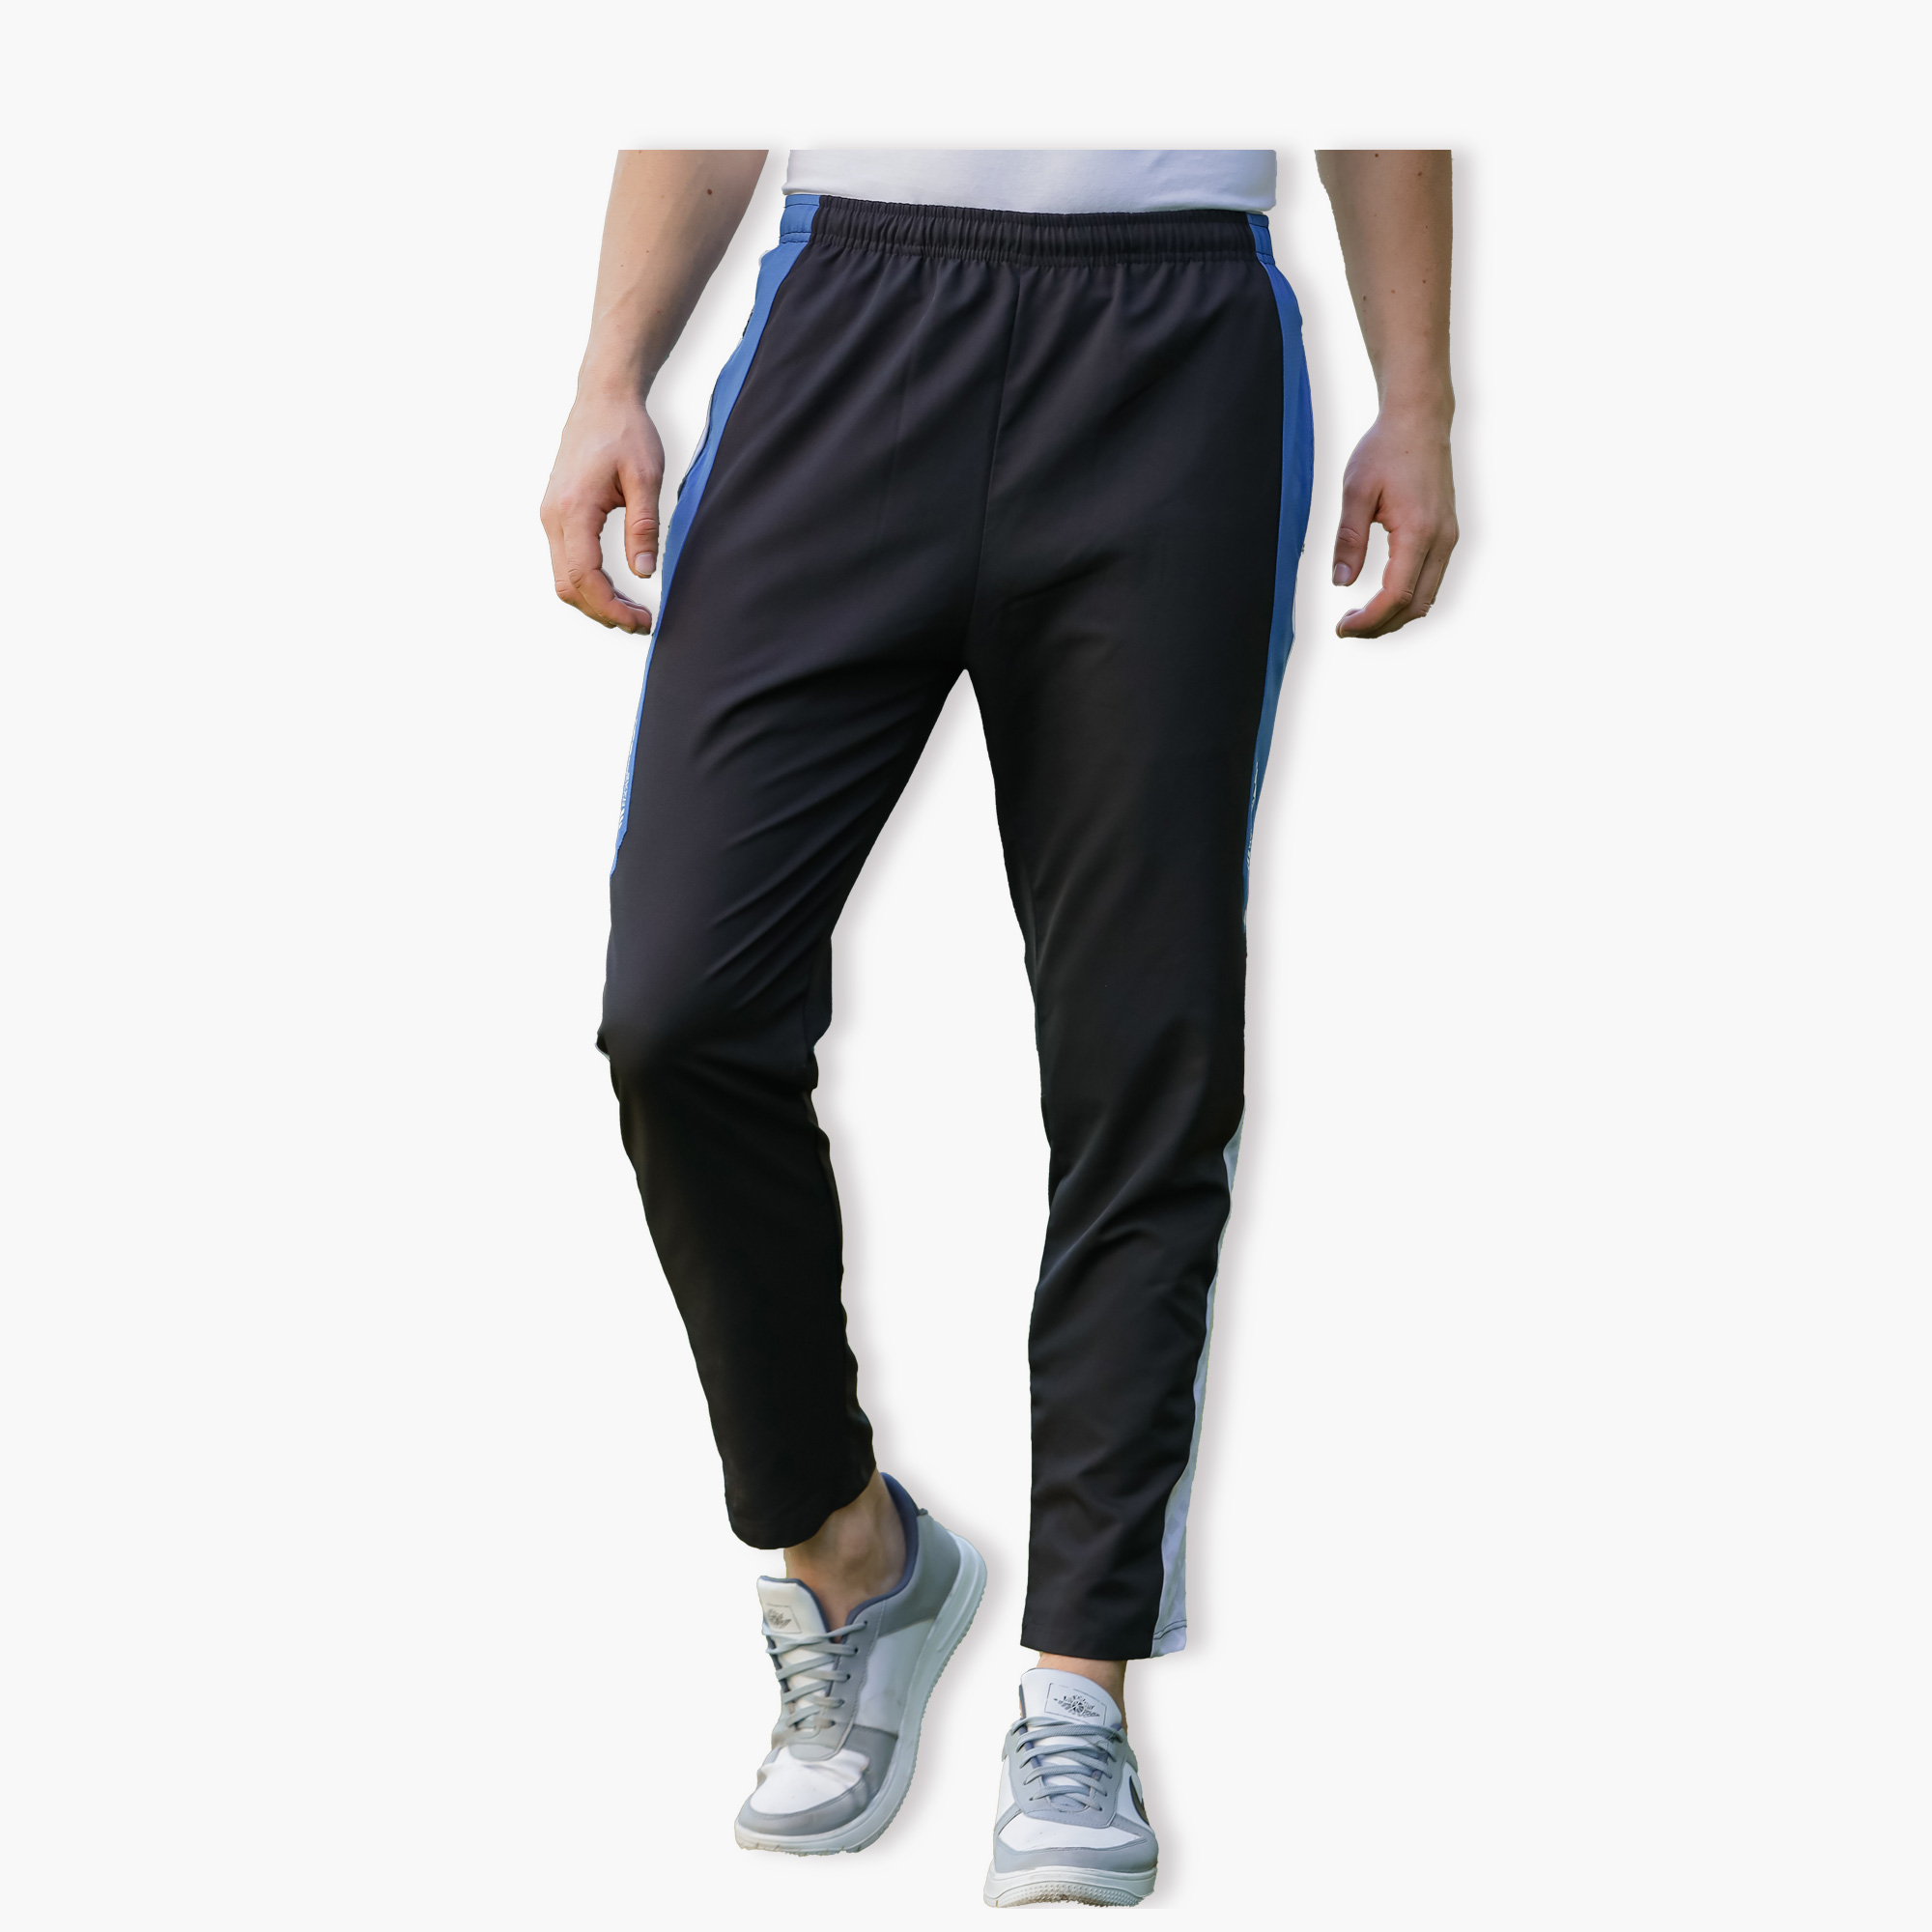 High Quality Track Pants - lower price, Wholesale, Cheap Track Pants - US  Sports Uniforms